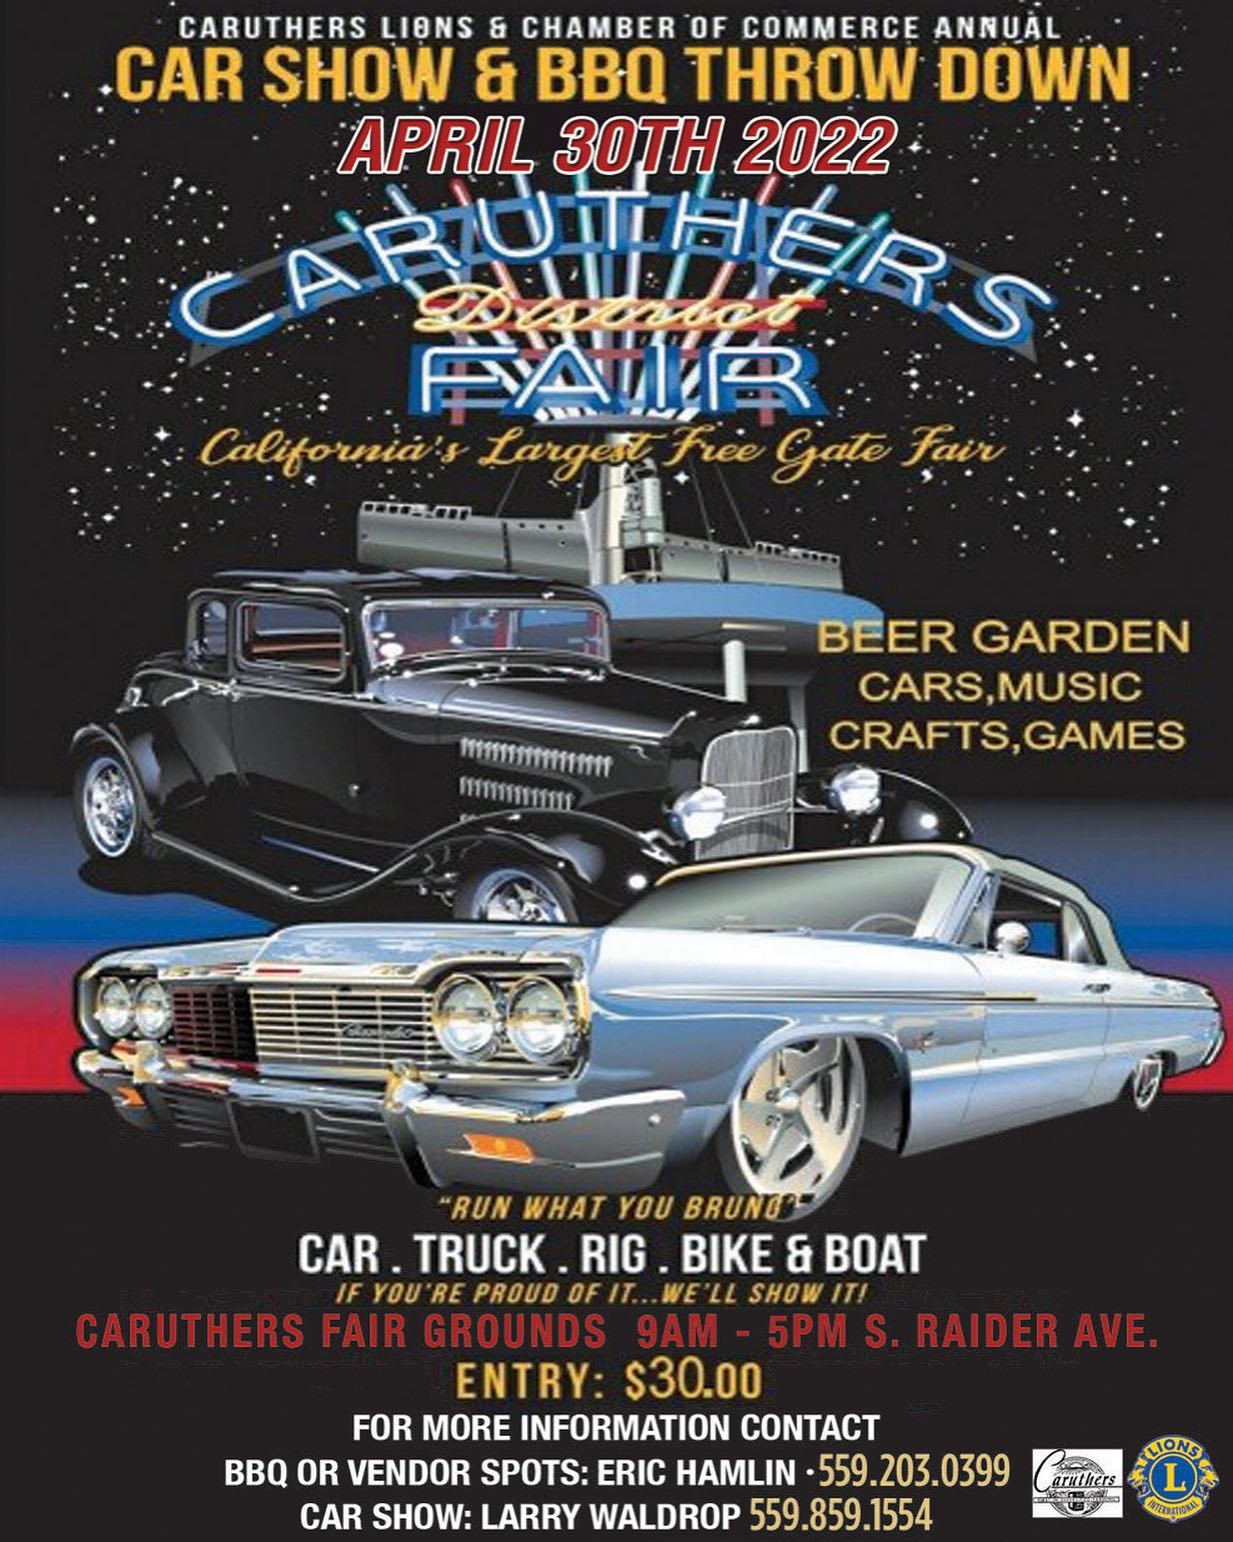 Caruthers Car Show & BBQ Throw Down NorCal Car Culture